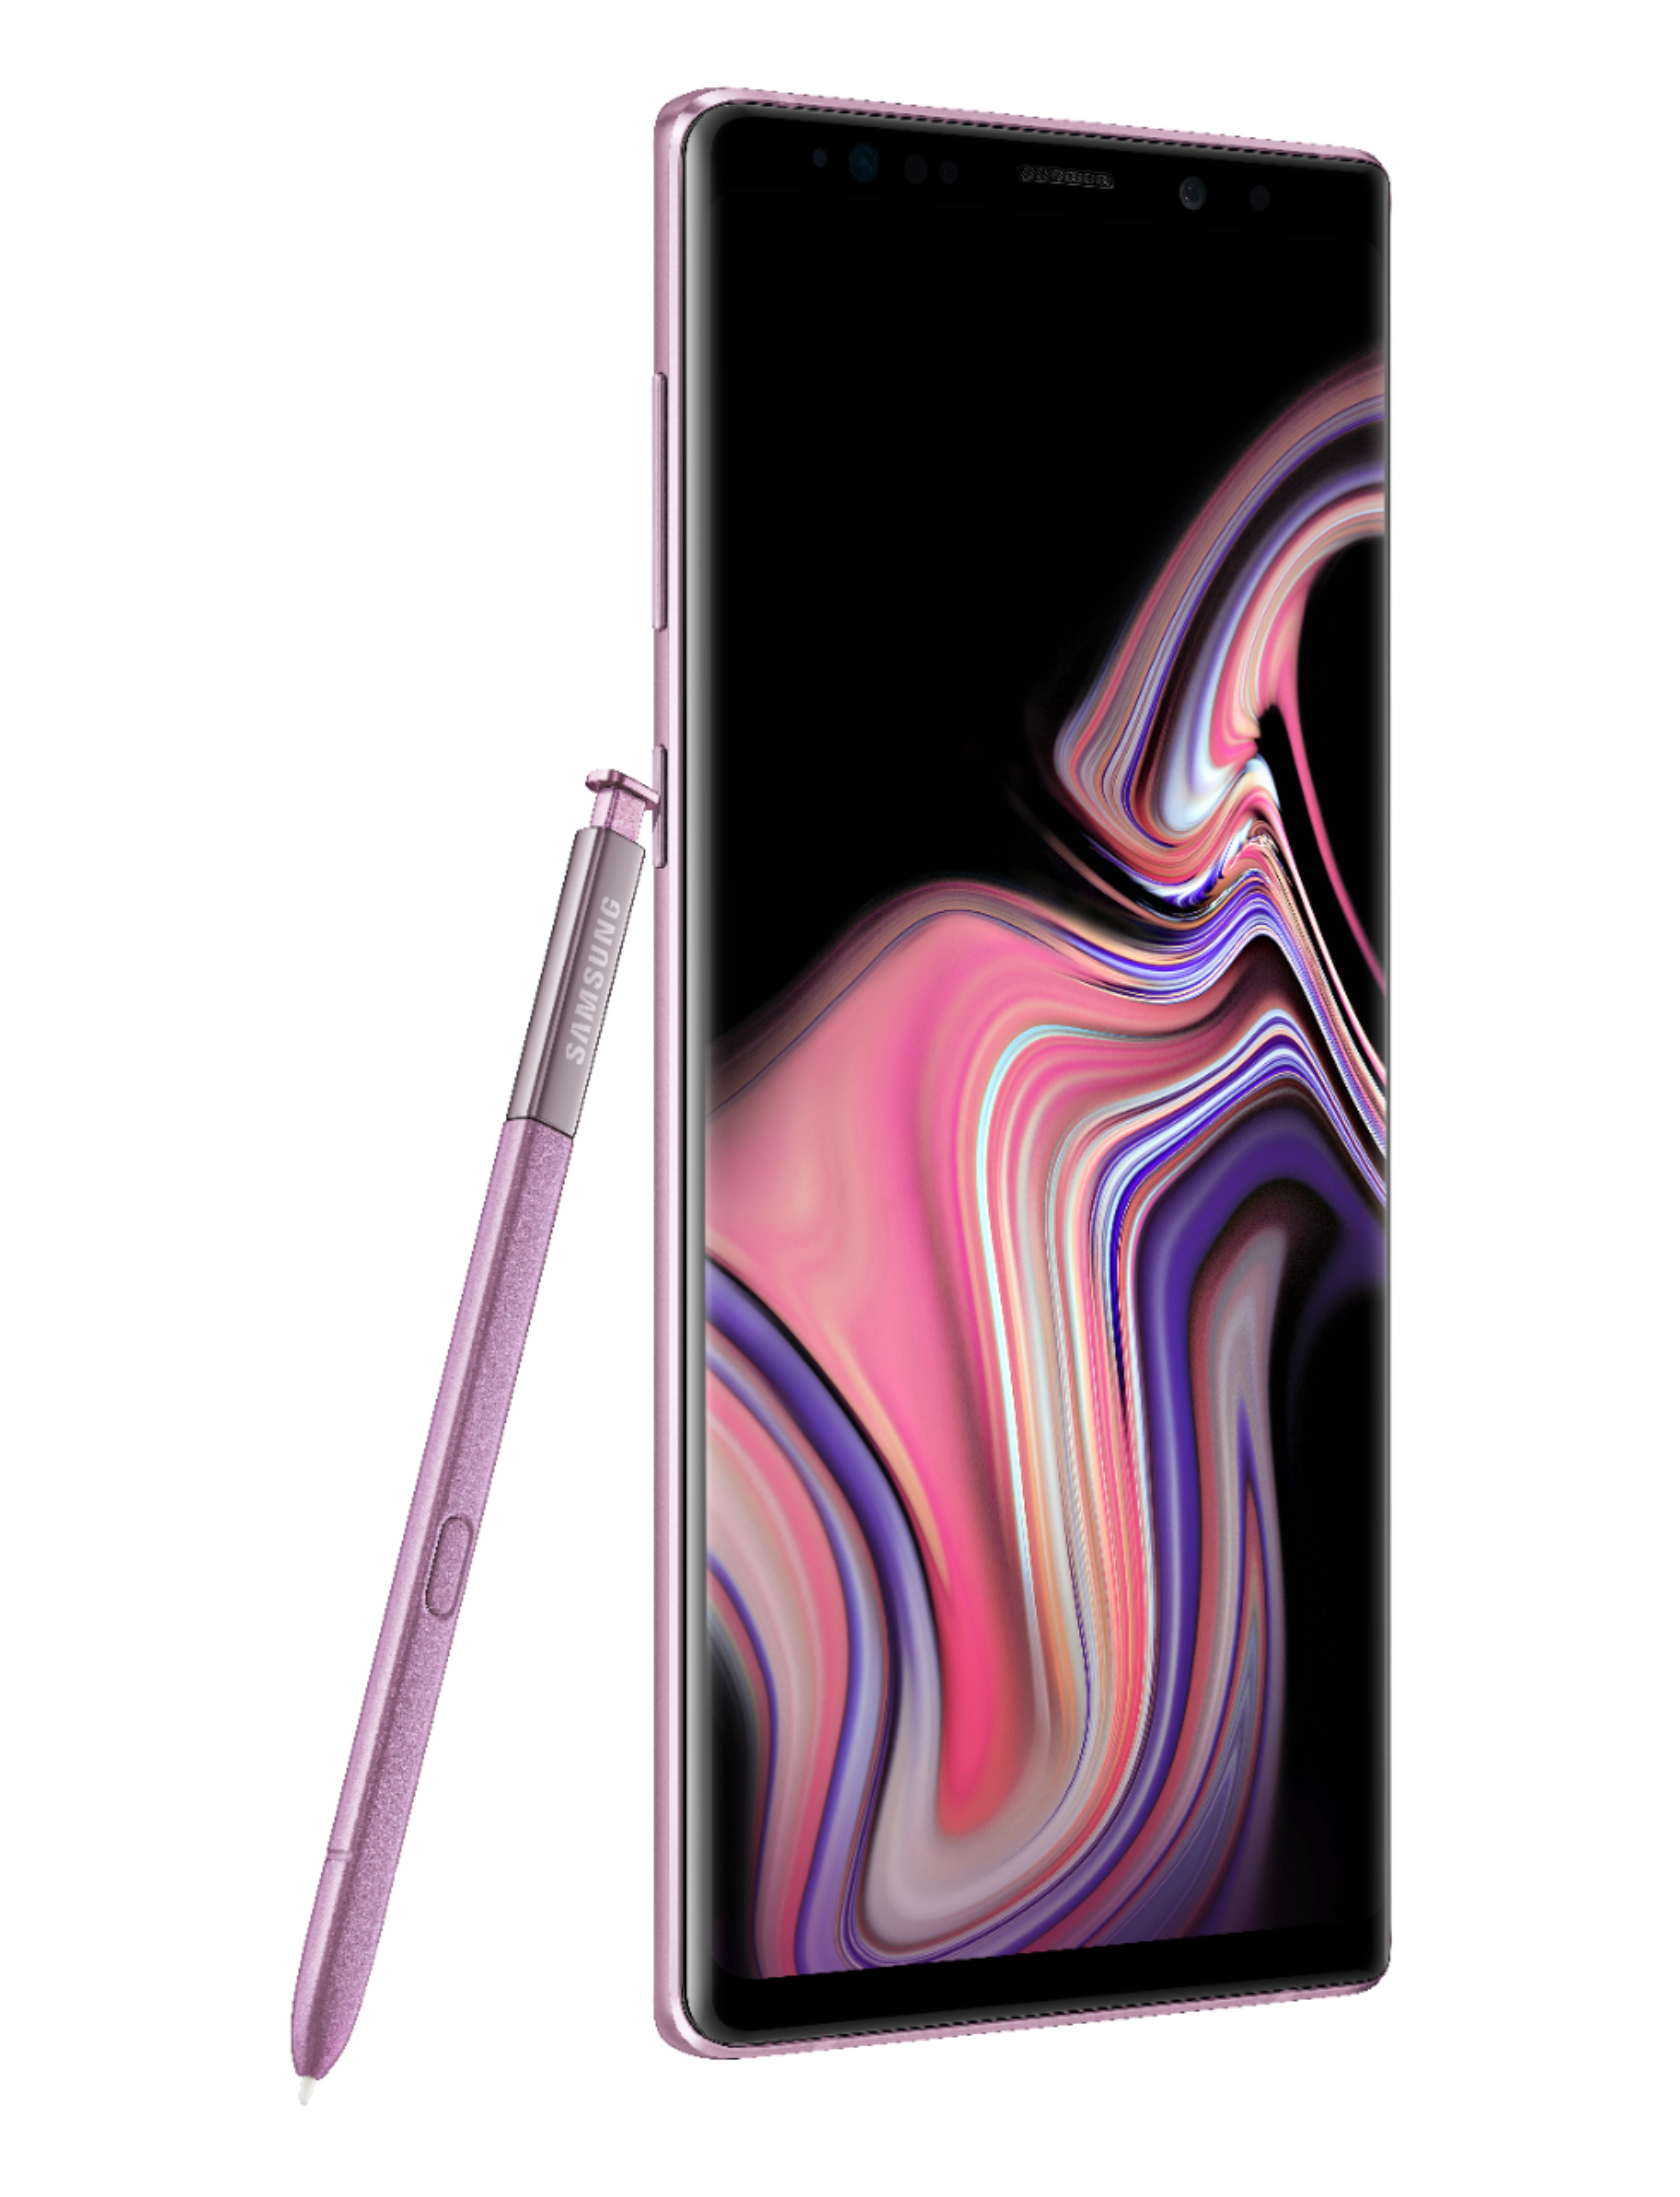 Angle View: Samsung - Geek Squad Certified Refurbished Galaxy Note9 128GB - Lavender Purple (AT&T)